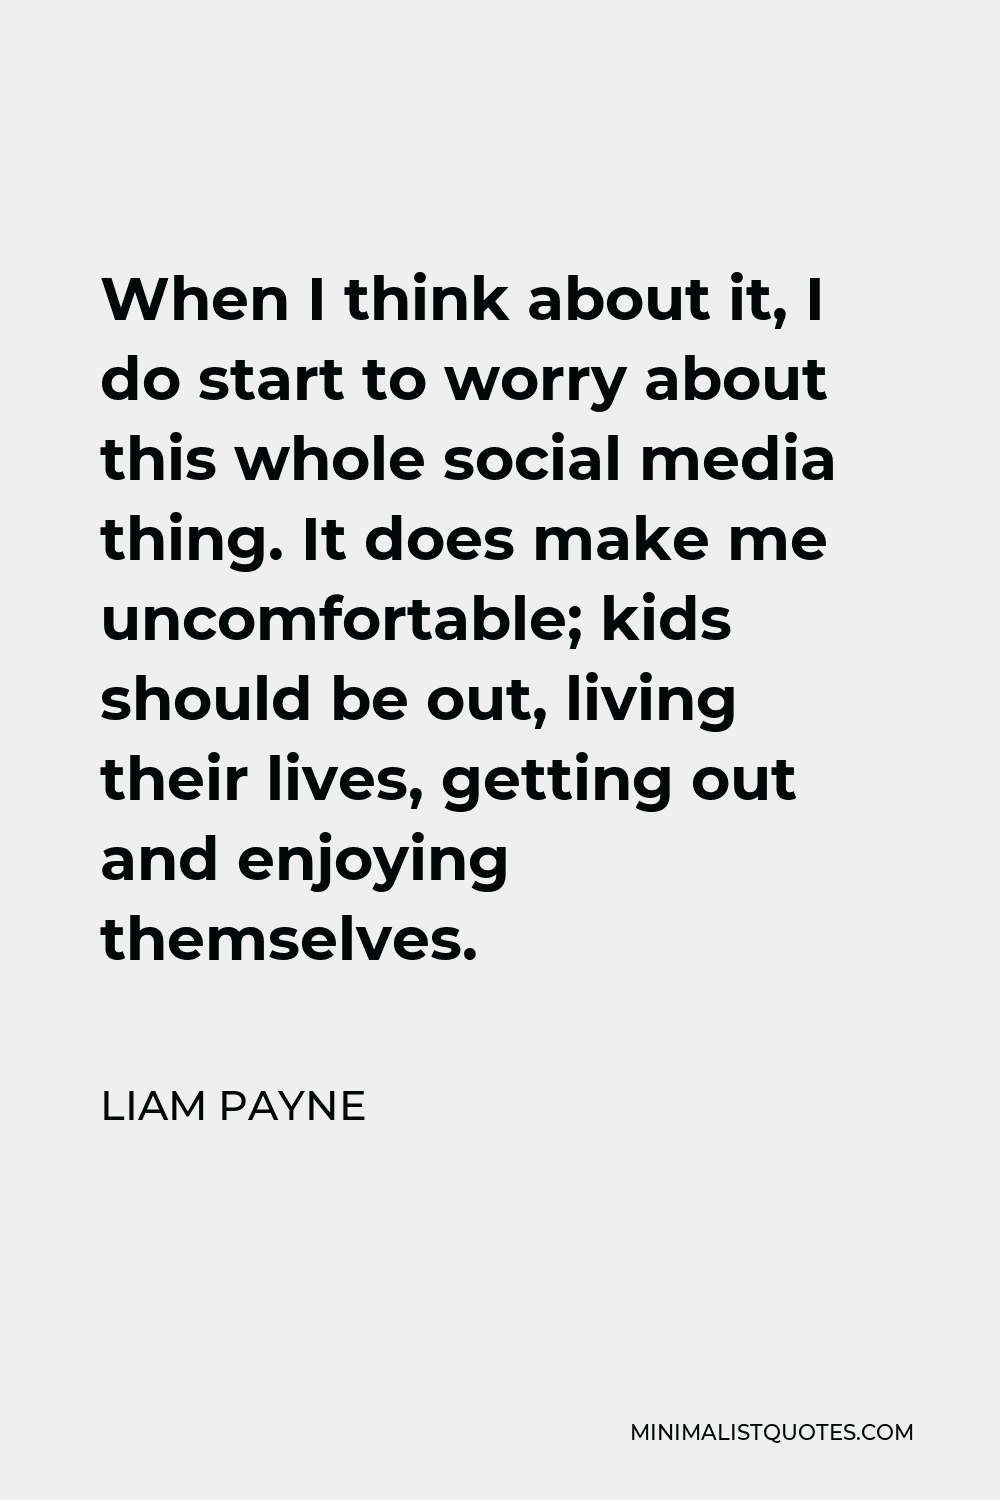 Liam Payne Quote - When I think about it, I do start to worry about this whole social media thing. It does make me uncomfortable; kids should be out, living their lives, getting out and enjoying themselves.